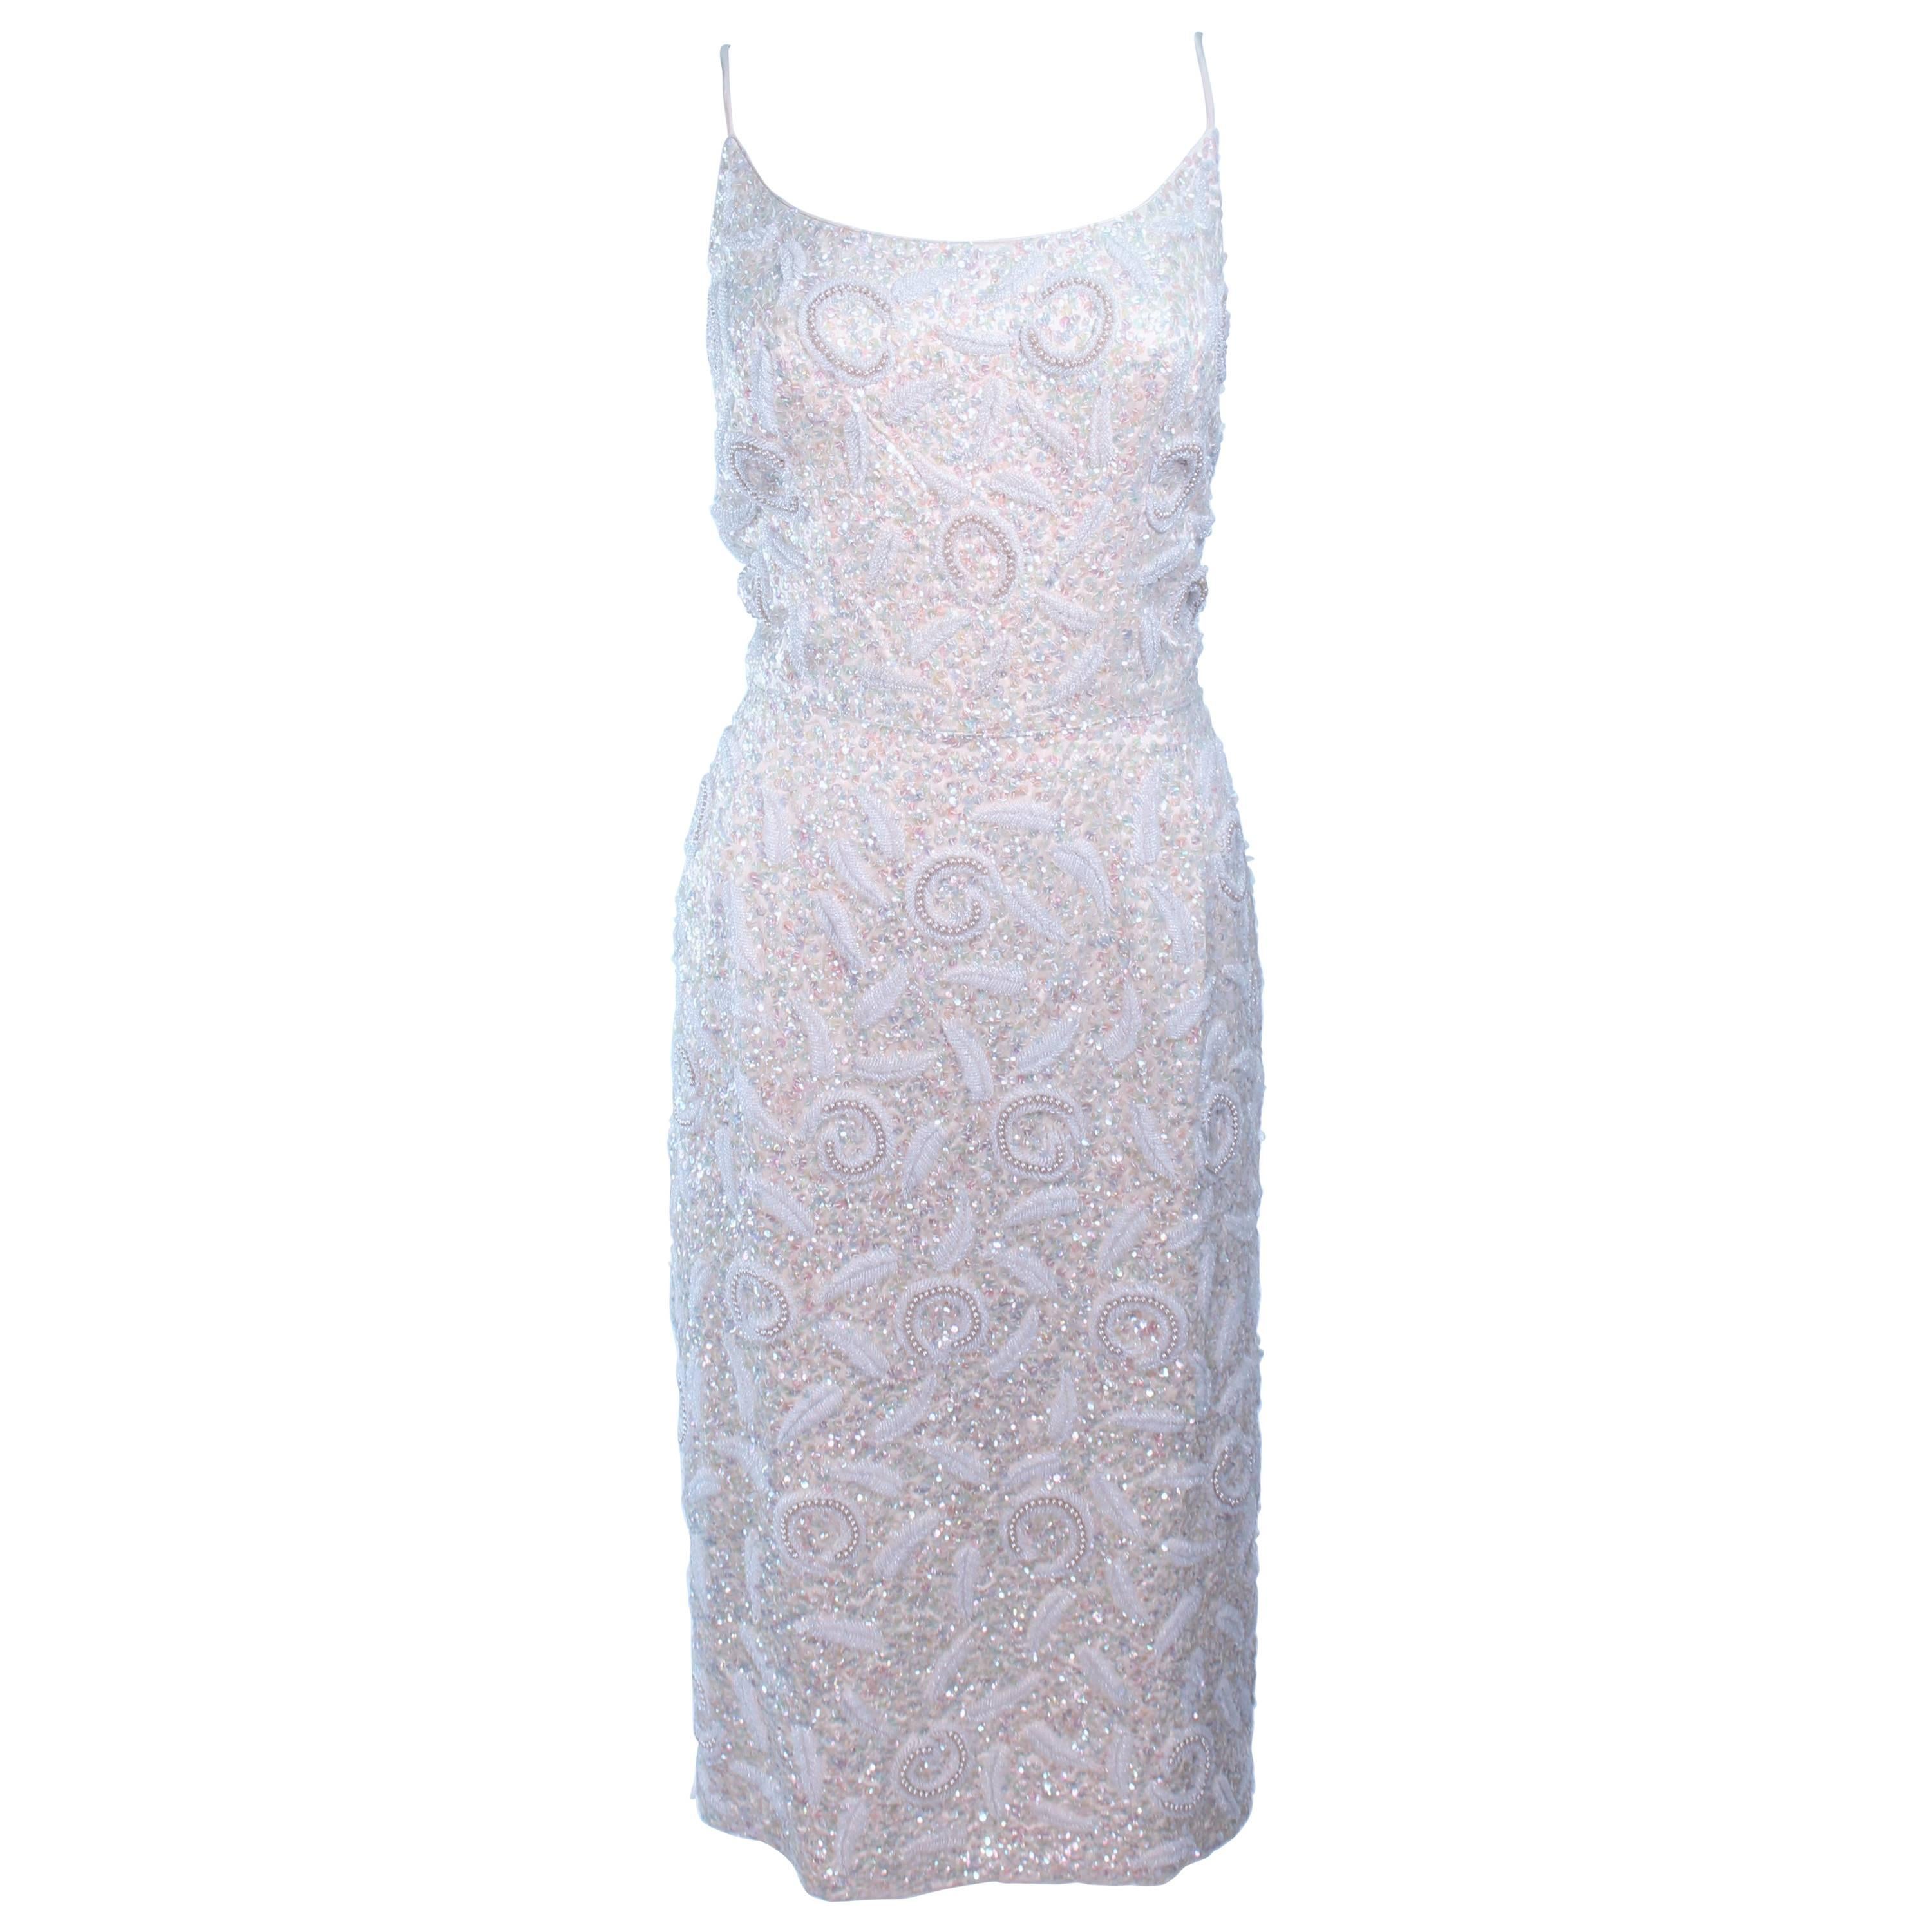 SWEE LO HAUTE COUTURE INTERNATIONAL Ivory Iridescent Cocktail Dress Size 8 10 For Sale